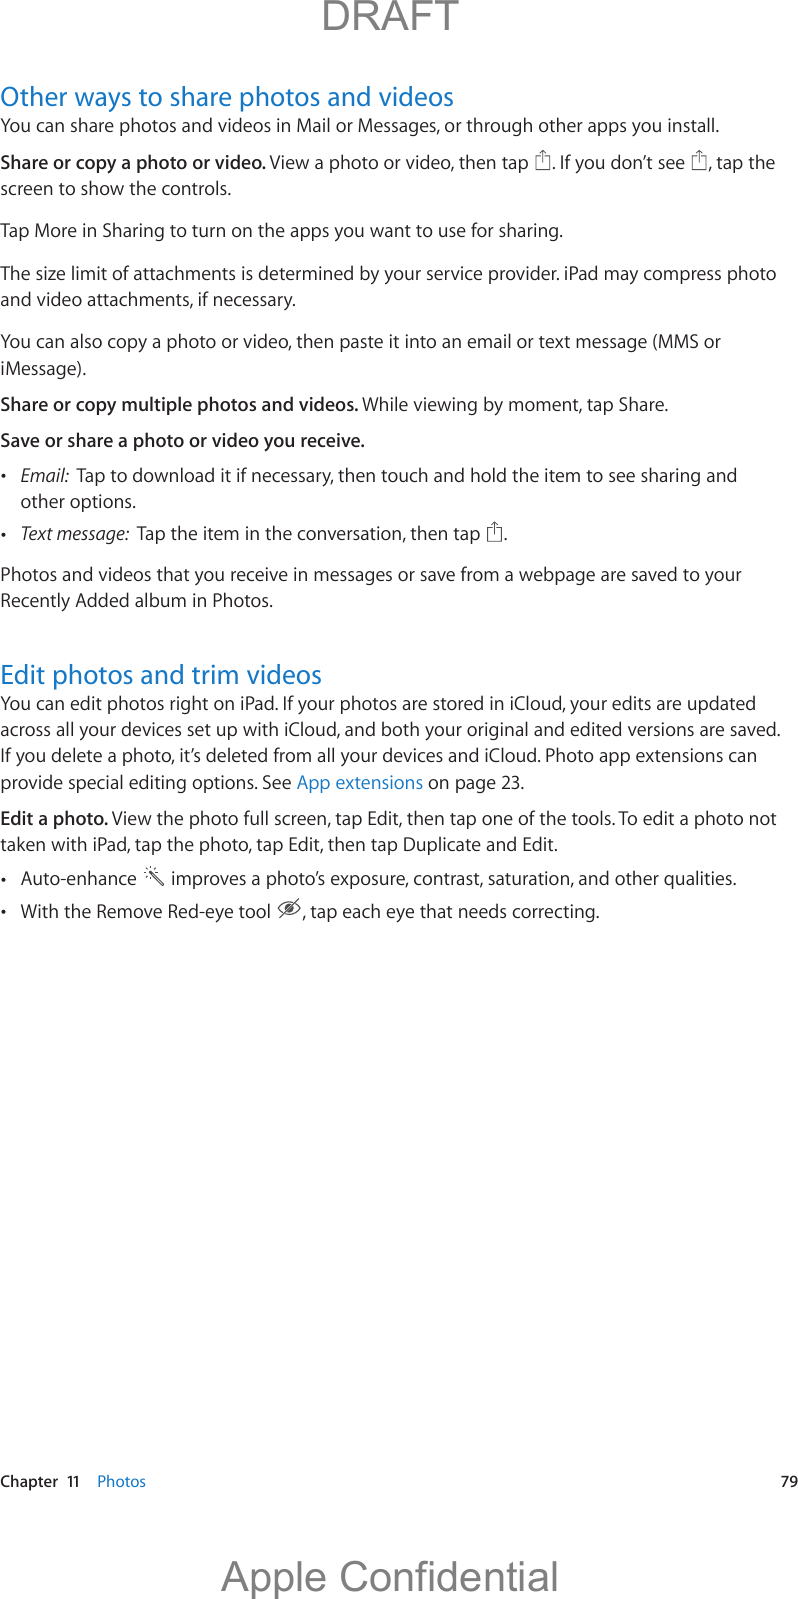   Chapter  11    Photos  79Other ways to share photos and videosYou can share photos and videos in Mail or Messages, or through other apps you install. Share or copy a photo or video. View a photo or video, then tap  . If you don’t see  , tap the screen to show the controls.Tap More in Sharing to turn on the apps you want to use for sharing. The size limit of attachments is determined by your service provider. iPad may compress photo and video attachments, if necessary.You can also copy a photo or video, then paste it into an email or text message (MMS or iMessage).Share or copy multiple photos and videos. While viewing by moment, tap Share. Save or share a photo or video you receive.  Email:  Tap to download it if necessary, then touch and hold the item to see sharing and other options. Text message:  Tap the item in the conversation, then tap  .Photos and videos that you receive in messages or save from a webpage are saved to your Recently Added album in Photos.Edit photos and trim videosYou can edit photos right on iPad. If your photos are stored in iCloud, your edits are updated across all your devices set up with iCloud, and both your original and edited versions are saved. If you delete a photo, it’s deleted from all your devices and iCloud. Photo app extensions can provide special editing options. See App extensions on page 23.Edit a photo. View the photo full screen, tap Edit, then tap one of the tools. To edit a photo not taken with iPad, tap the photo, tap Edit, then tap Duplicate and Edit. Auto-enhance   improves a photo’s exposure, contrast, saturation, and other qualities. With the Remove Red-eye tool  , tap each eye that needs correcting.          DRAFTApple Confidential